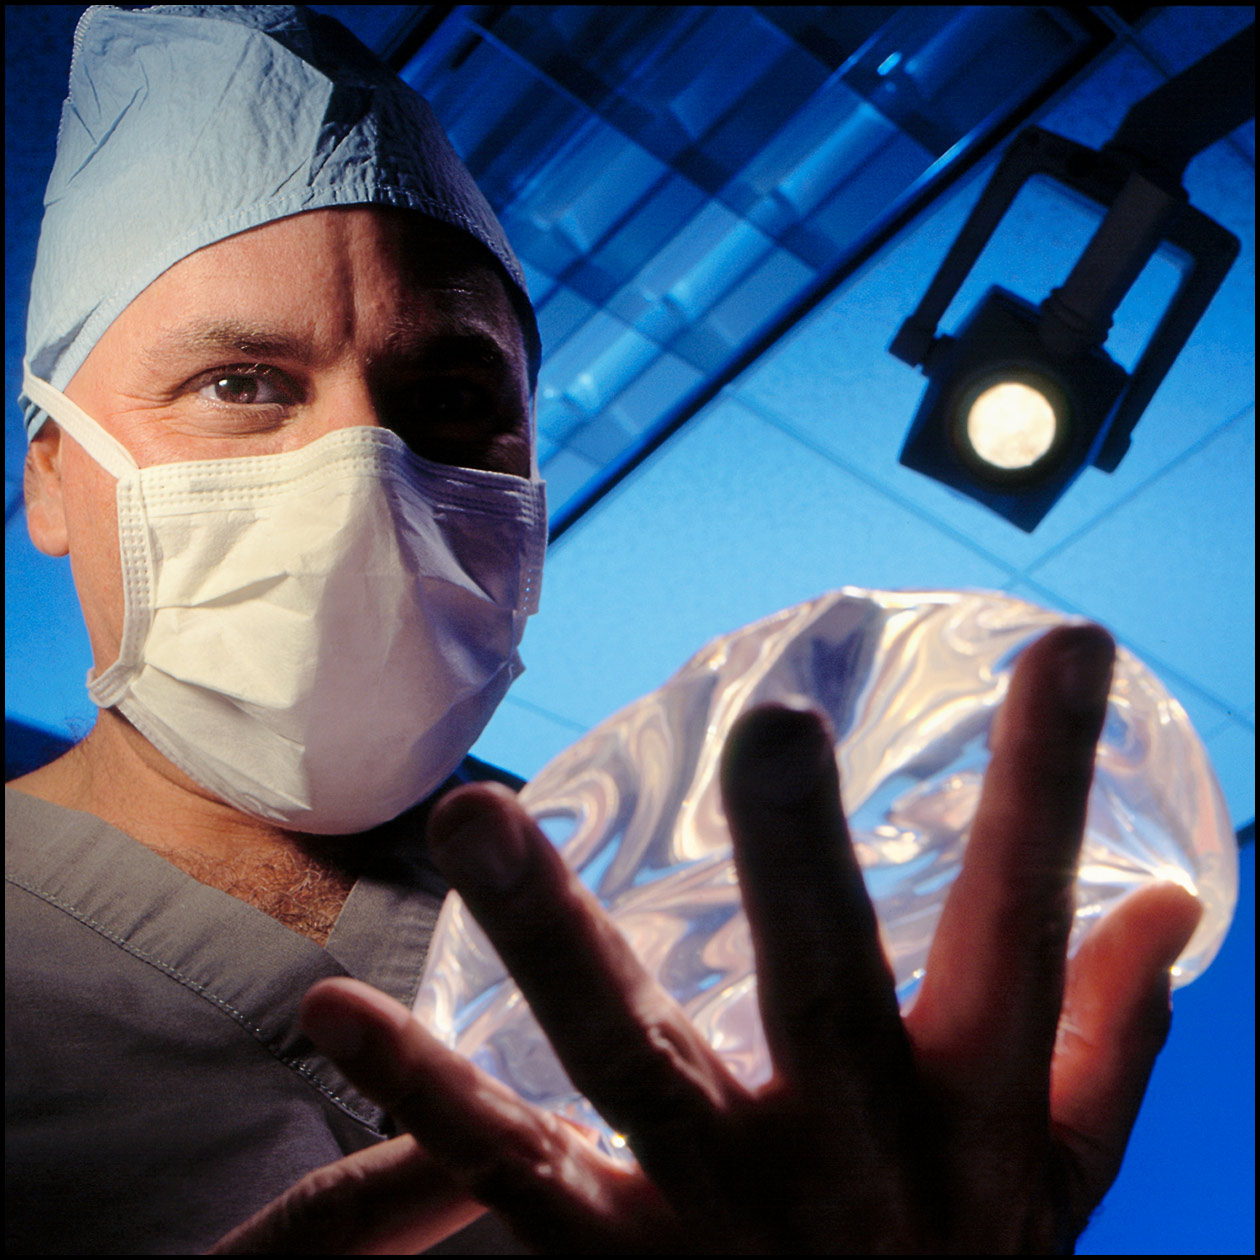 A SURGEON HOLDS A BREAST IMPLANT IN AN OPERATING ROOM  |  ROCKY KNETEN PHOTOGRAPHY